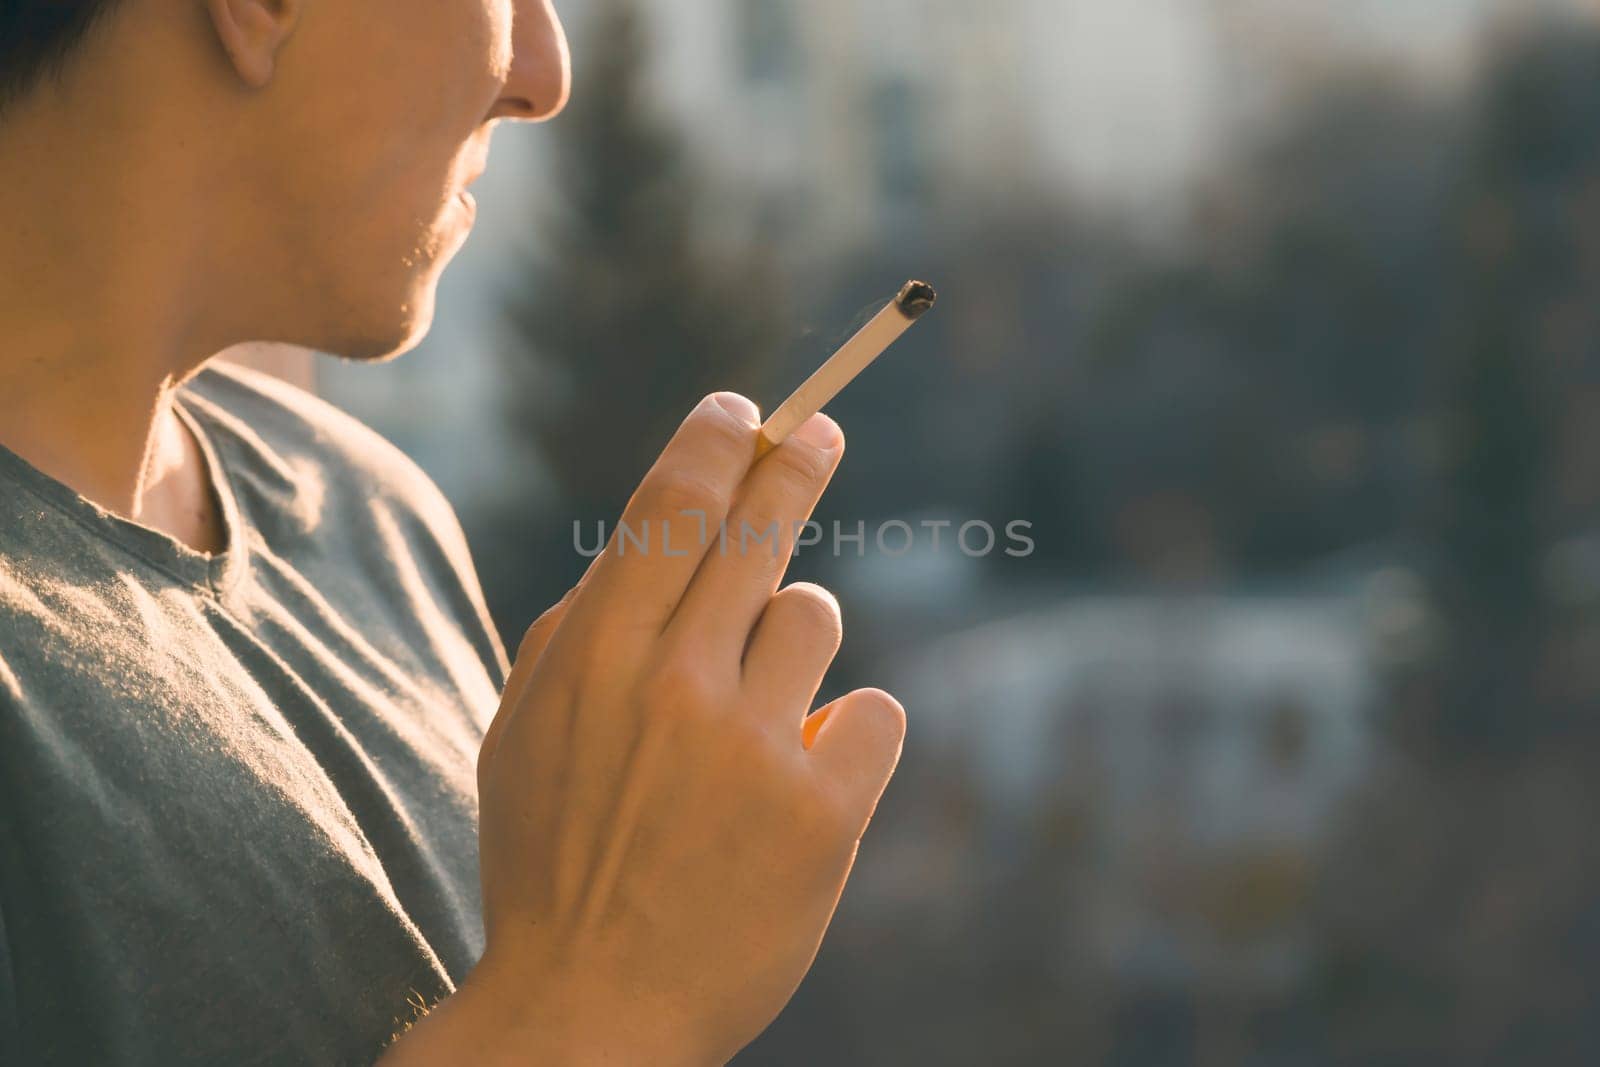 A young man smokes, holds a cigarette in his hand and inhales the smoke while standing at the window early in the morning in the sun, close-up view.